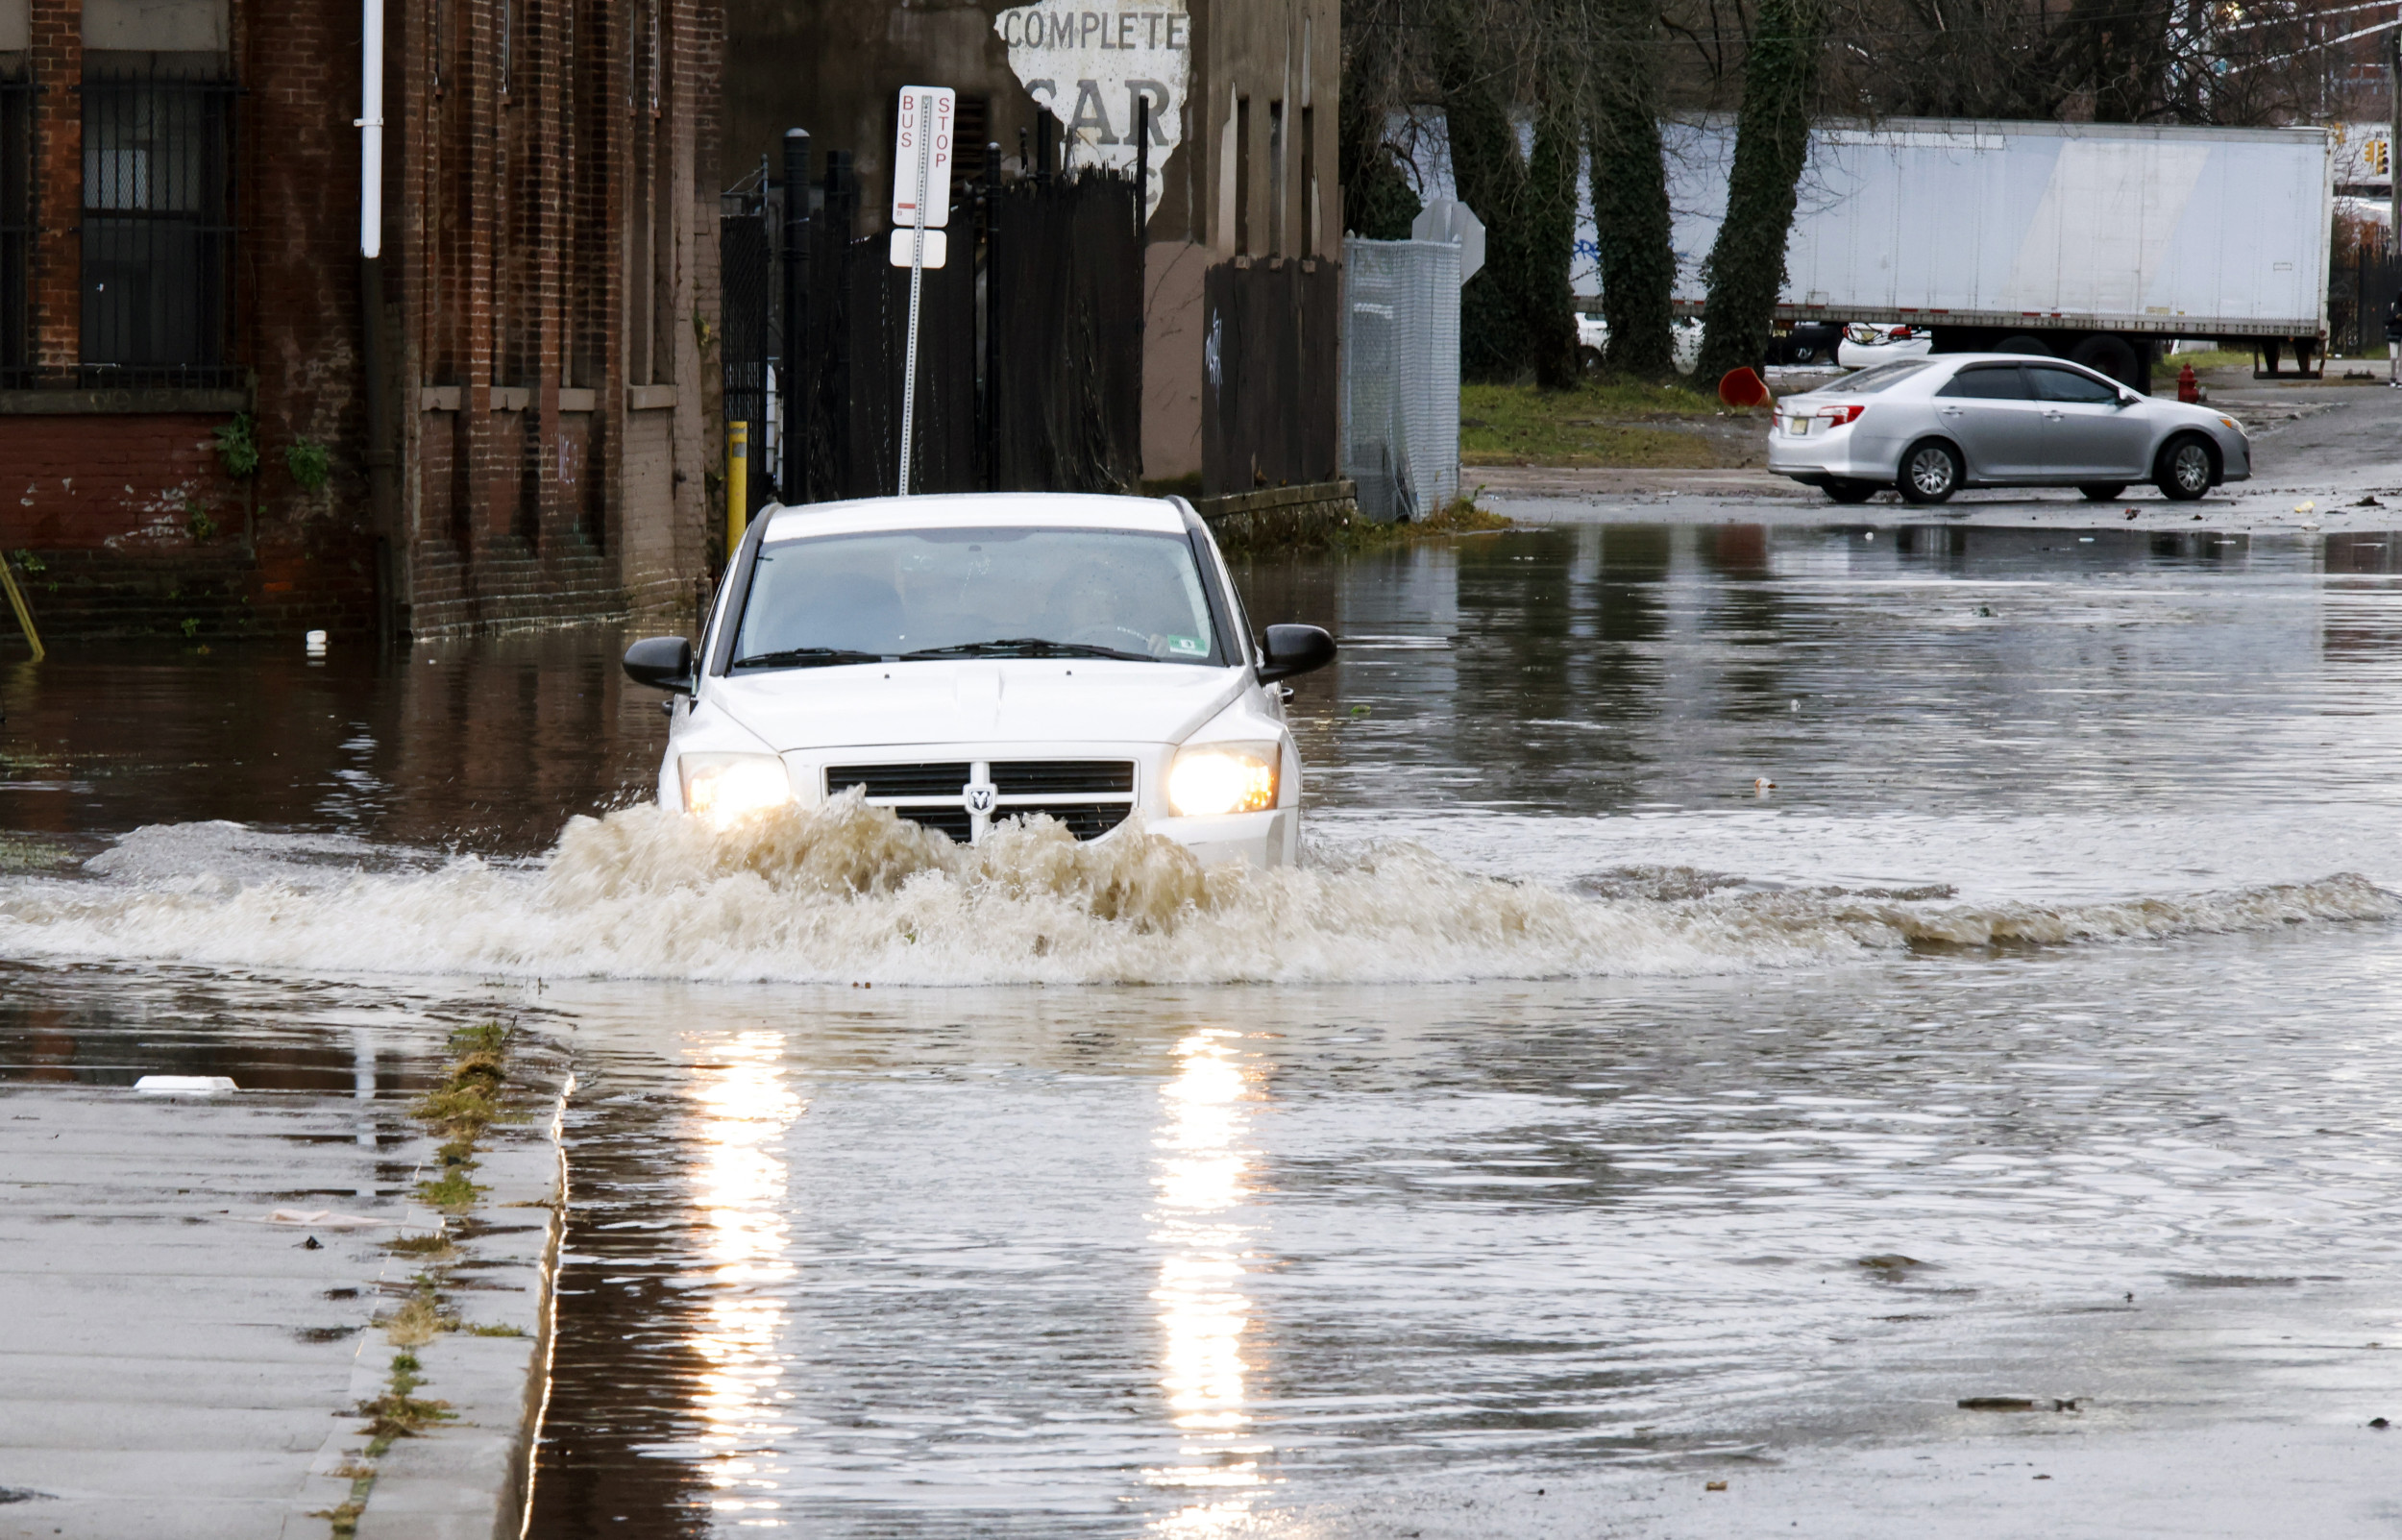 Flood warning in 10 states amid winter weather alerts